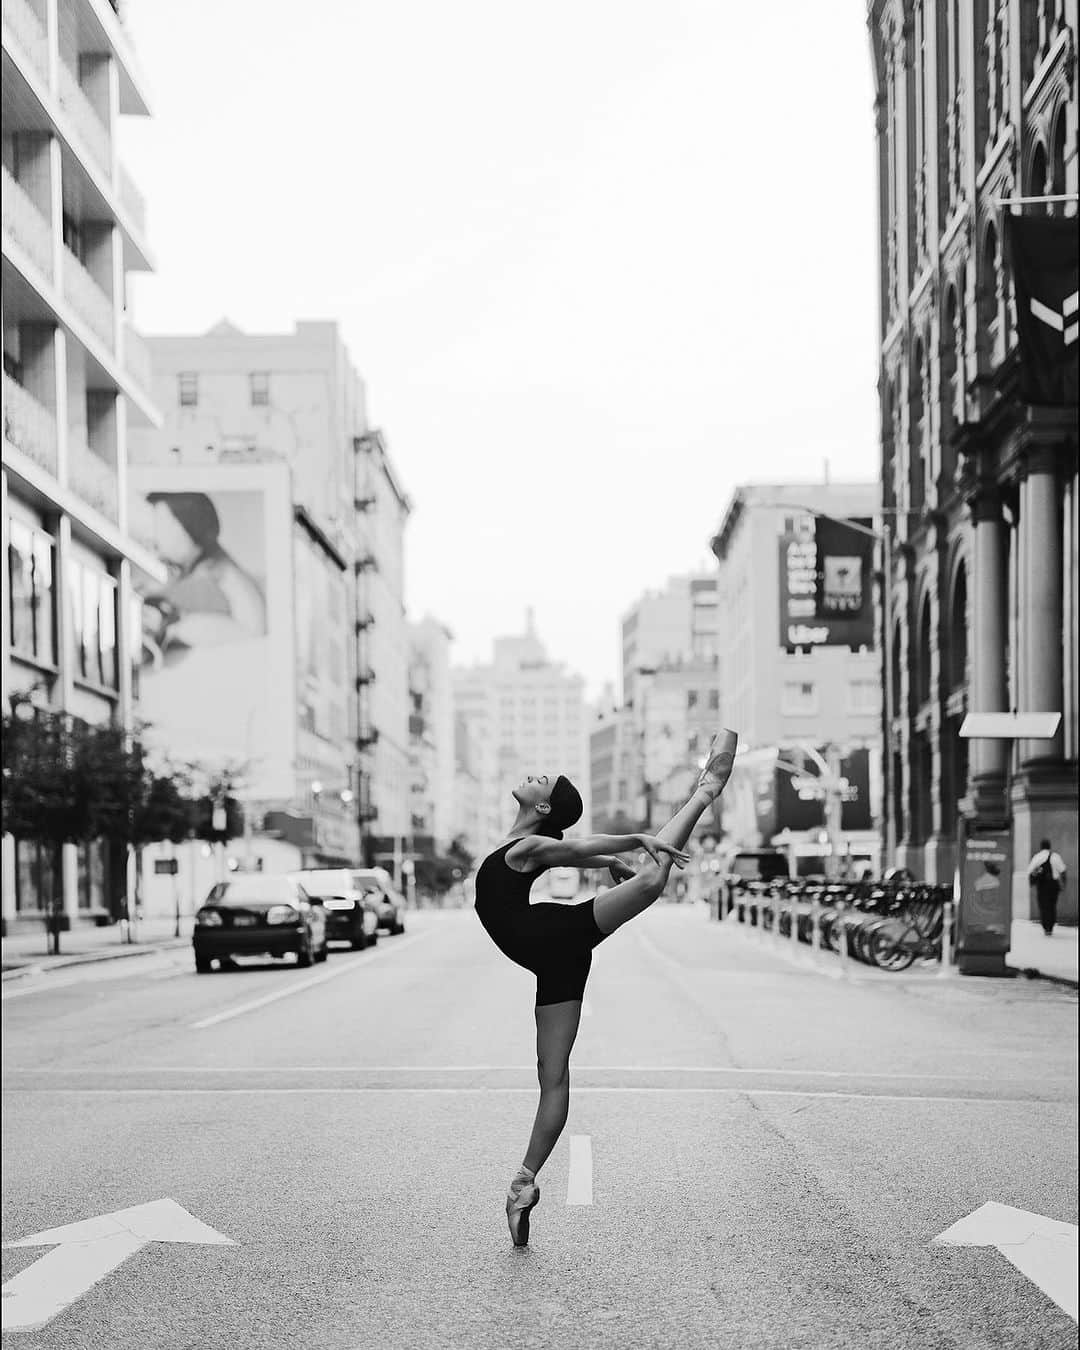 ballerina projectのインスタグラム：「𝐒𝐲𝐝𝐧𝐞𝐲 𝐃𝐨𝐥𝐚𝐧 in Soho. 🚖🩰🏙️  @sydney.dolan #sydneydolan #ballerinaproject #ballerina #ballet #newyorkcity #soho #lafayette #dance   Ballerina Project 𝗹𝗮𝗿𝗴𝗲 𝗳𝗼𝗿𝗺𝗮𝘁 𝗹𝗶𝗺𝗶𝘁𝗲𝗱 𝗲𝗱𝘁𝗶𝗼𝗻 𝗽𝗿𝗶𝗻𝘁𝘀 and 𝗜𝗻𝘀𝘁𝗮𝘅 𝗰𝗼𝗹𝗹𝗲𝗰𝘁𝗶𝗼𝗻𝘀 on sale in our Etsy store. Link is located in our bio.  𝙎𝙪𝙗𝙨𝙘𝙧𝙞𝙗𝙚 to the 𝐁𝐚𝐥𝐥𝐞𝐫𝐢𝐧𝐚 𝐏𝐫𝐨𝐣𝐞𝐜𝐭 on Instagram to have access to exclusive and never seen before content. 🩰」